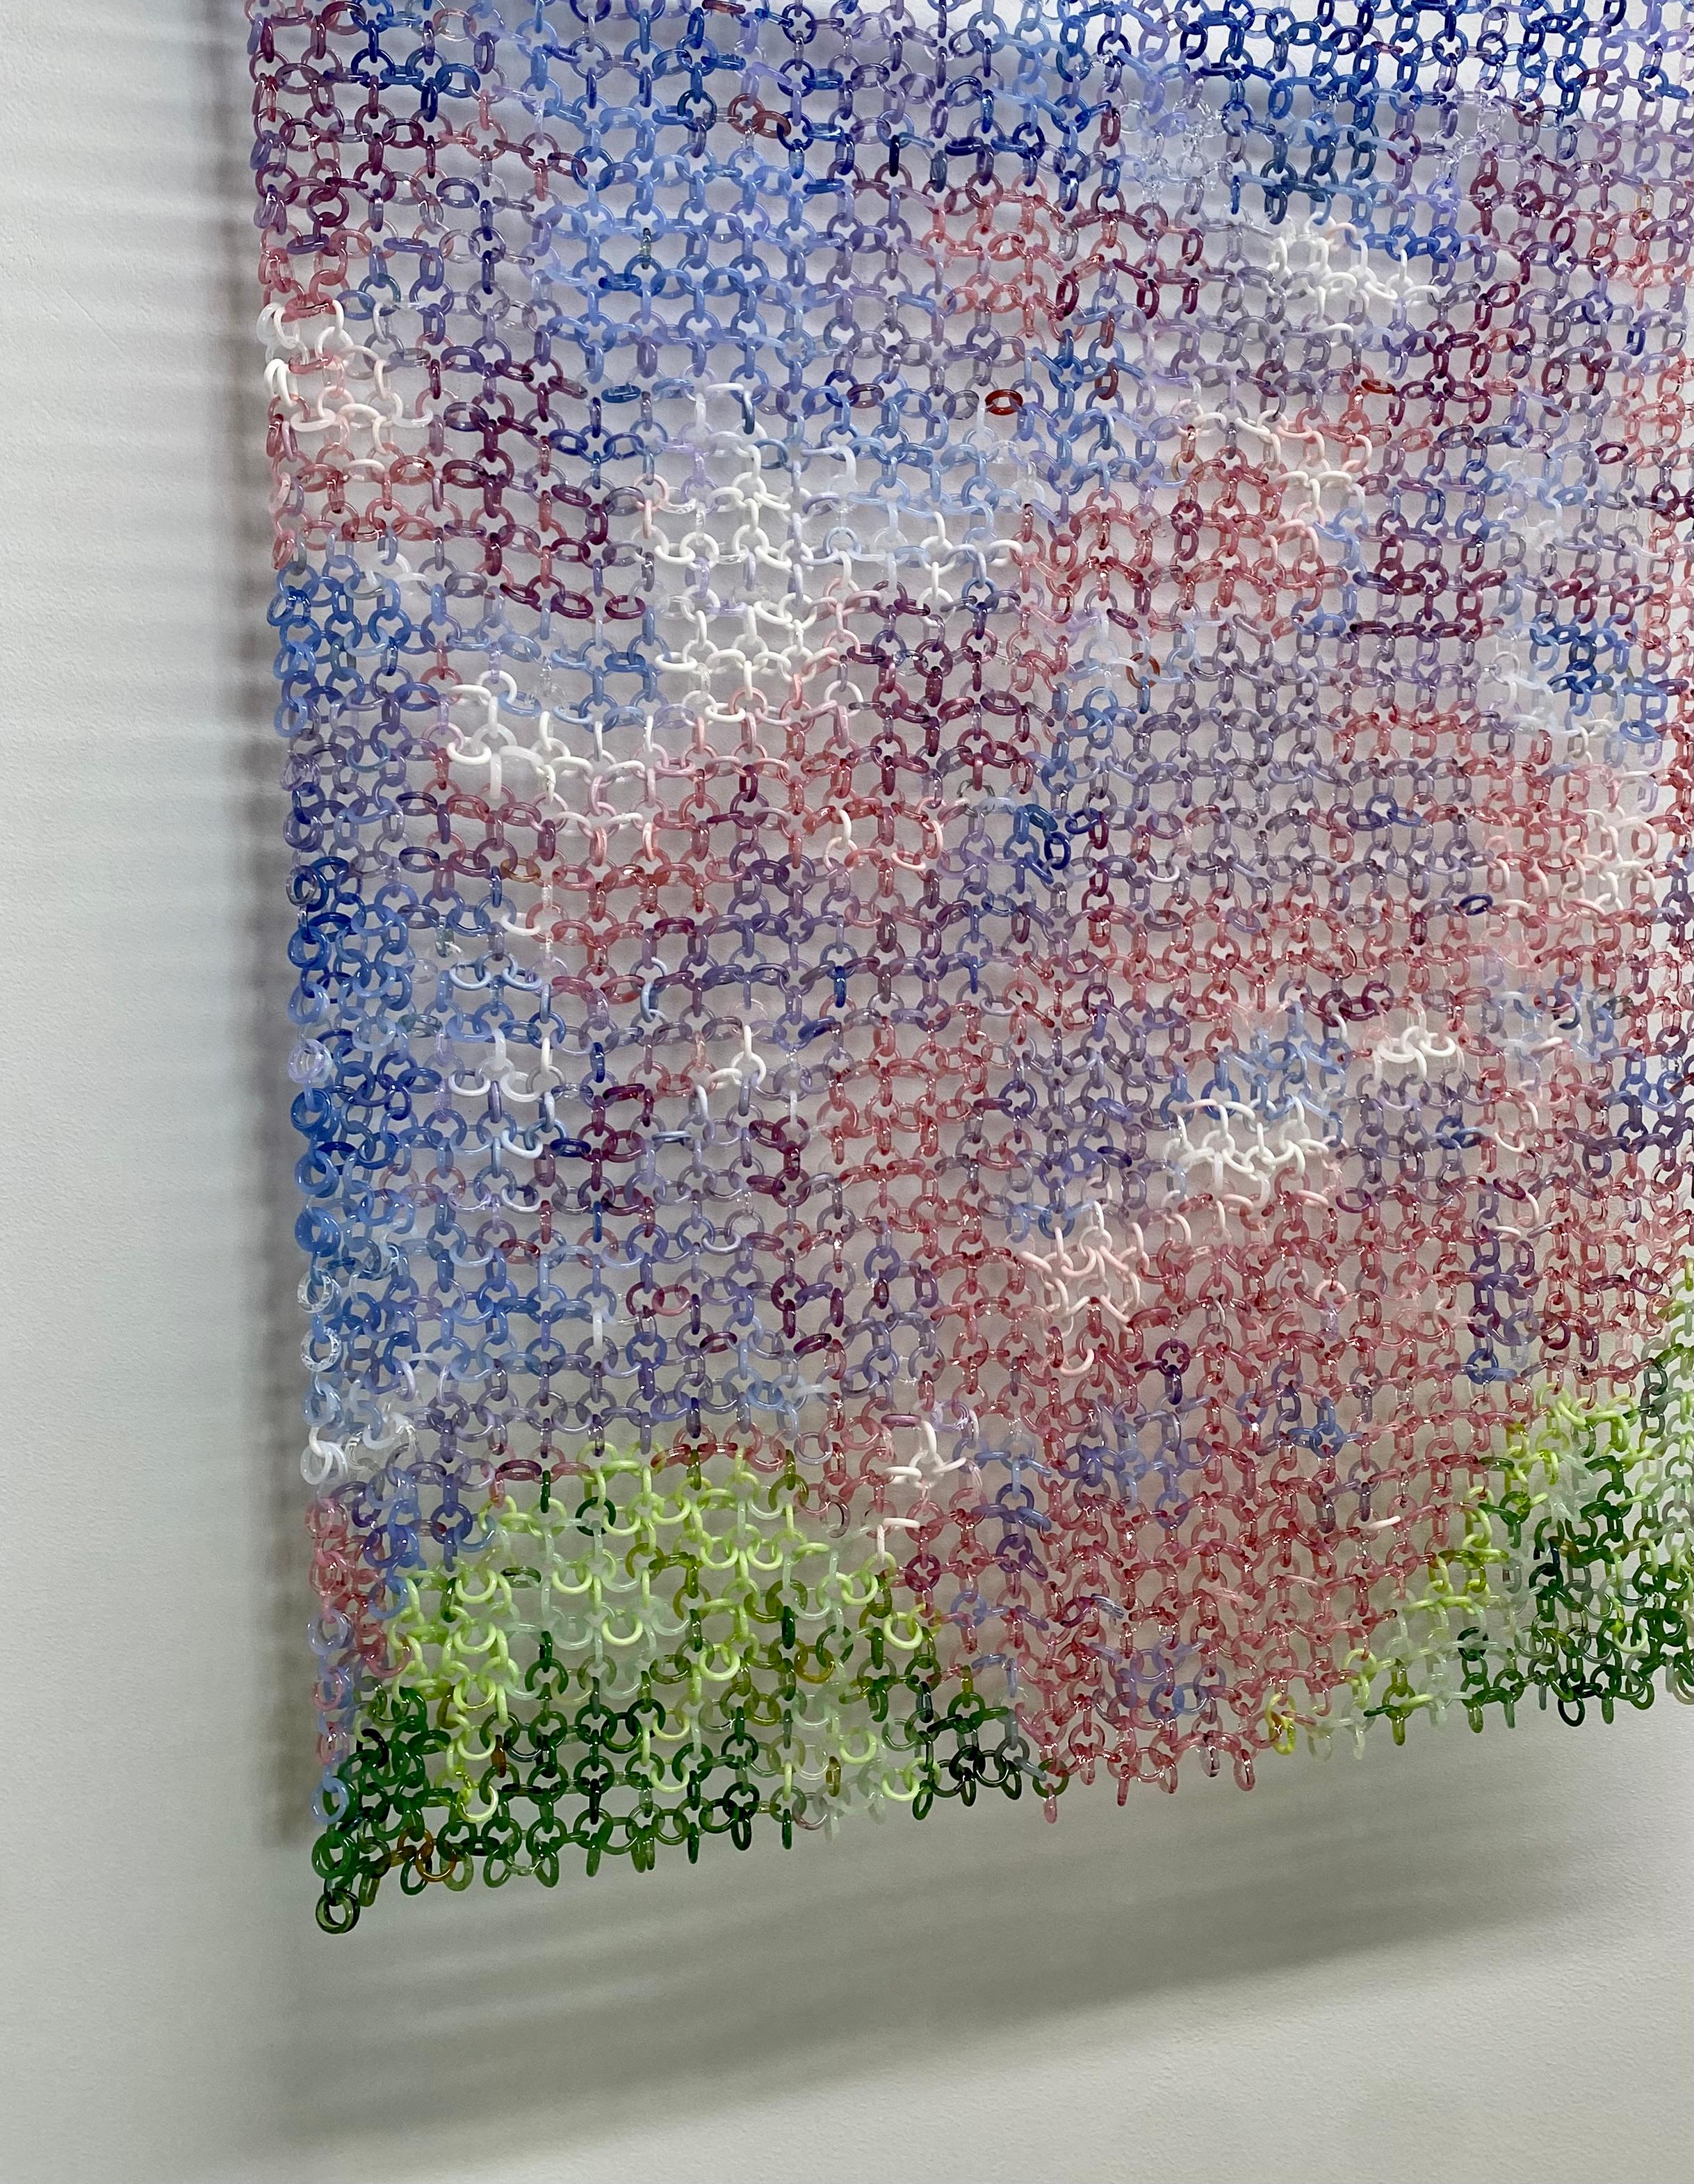 Magic Hour, Hanging Torch-Worked Glass Chain Maille, Blue, Red, White, Green - Contemporary Sculpture by David Licata